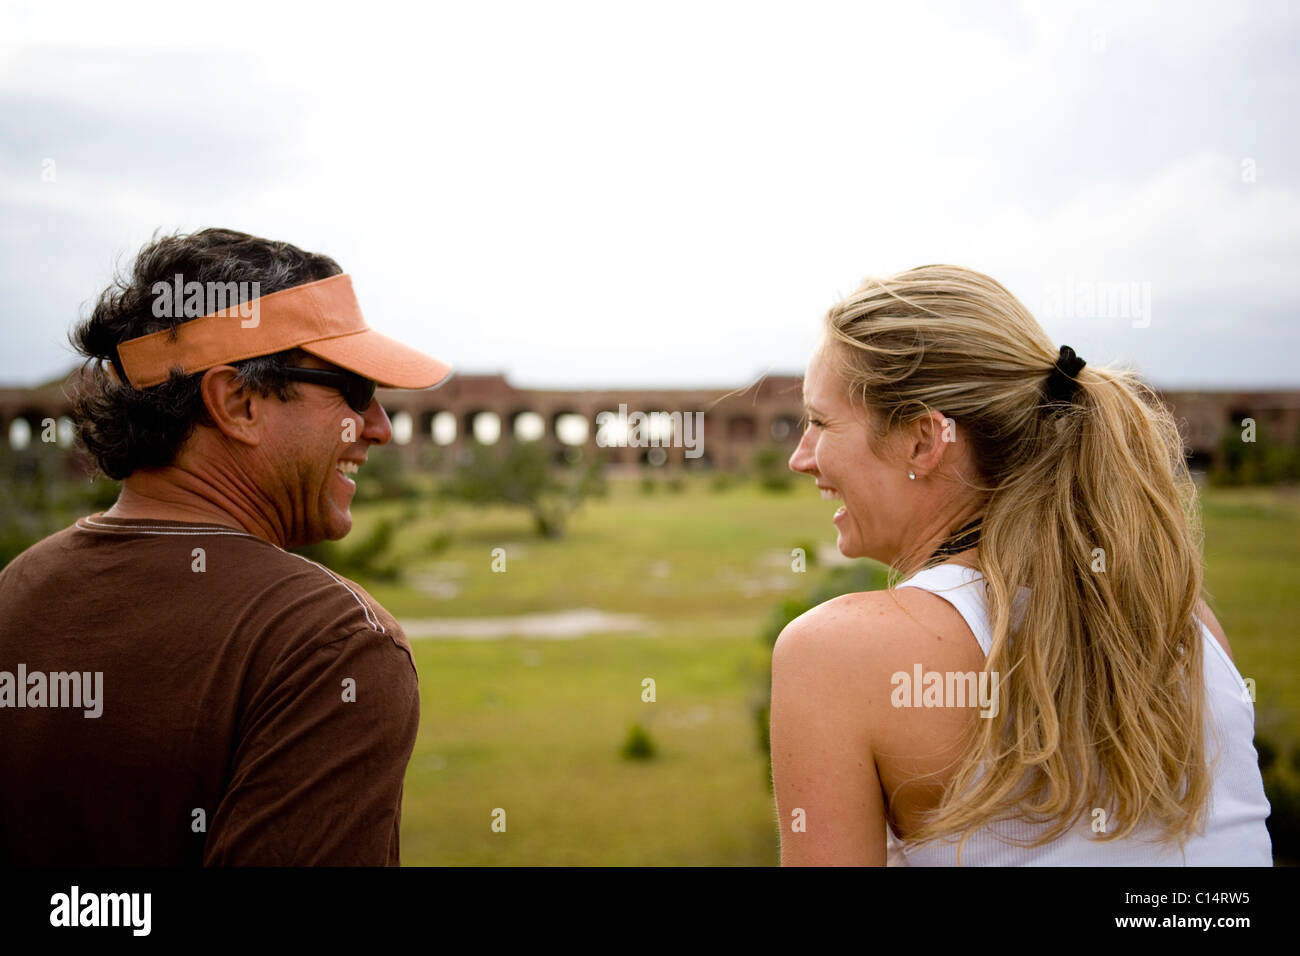 A man and a woman look at each other and laugh with grass and an old brick structure in the background. Stock Photo